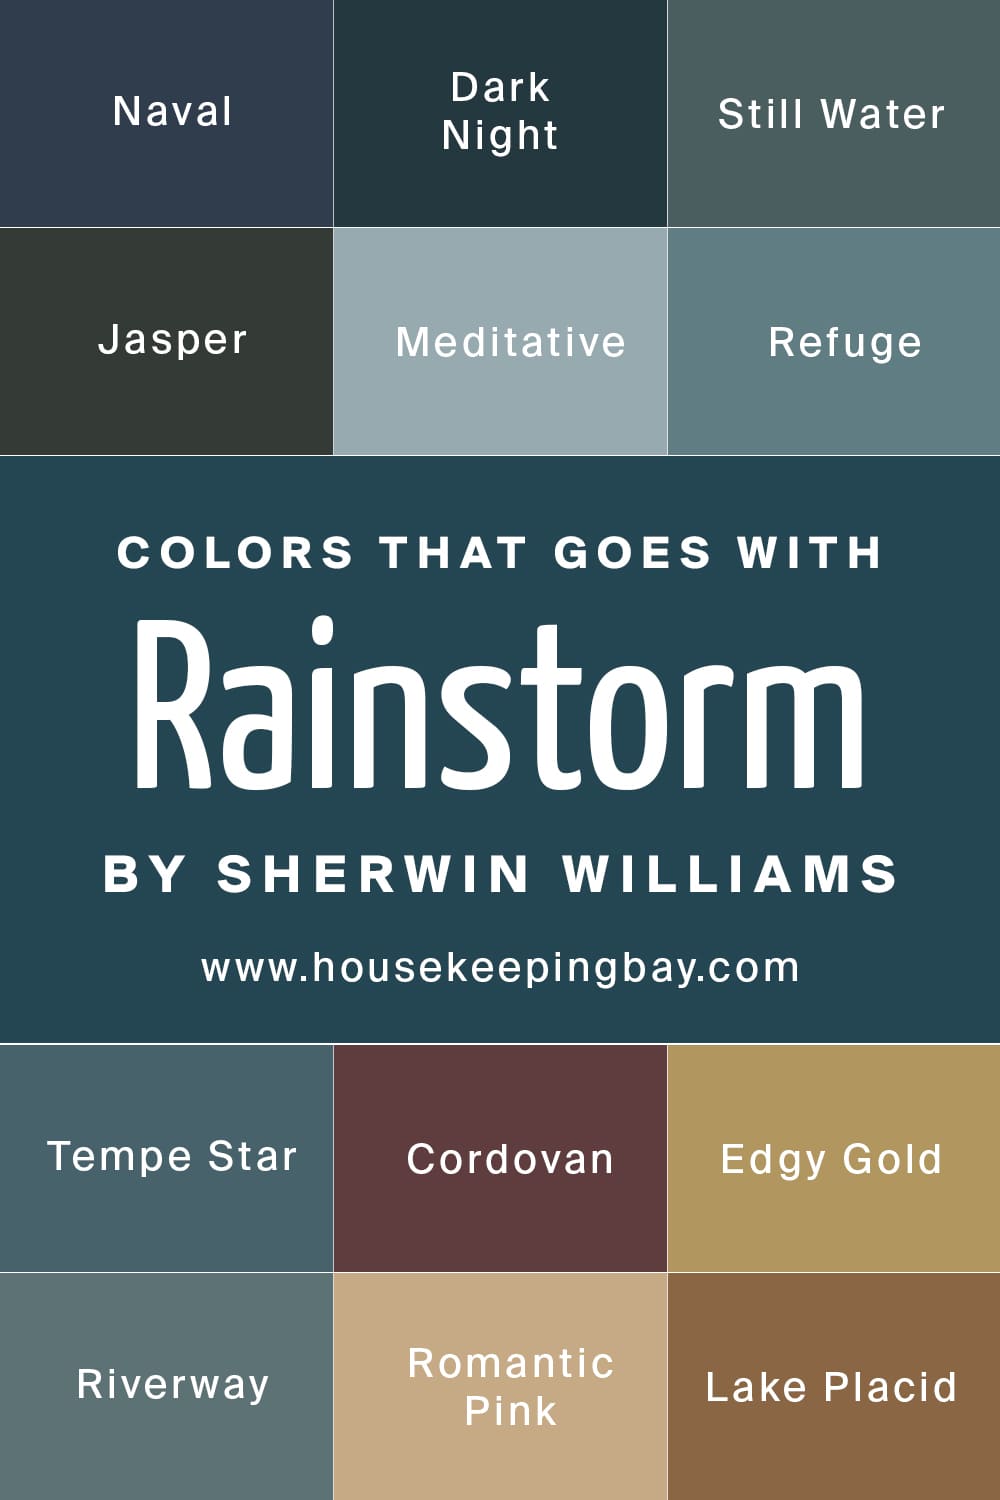 Colors that goes with Rainstorm by Sherwin Williams